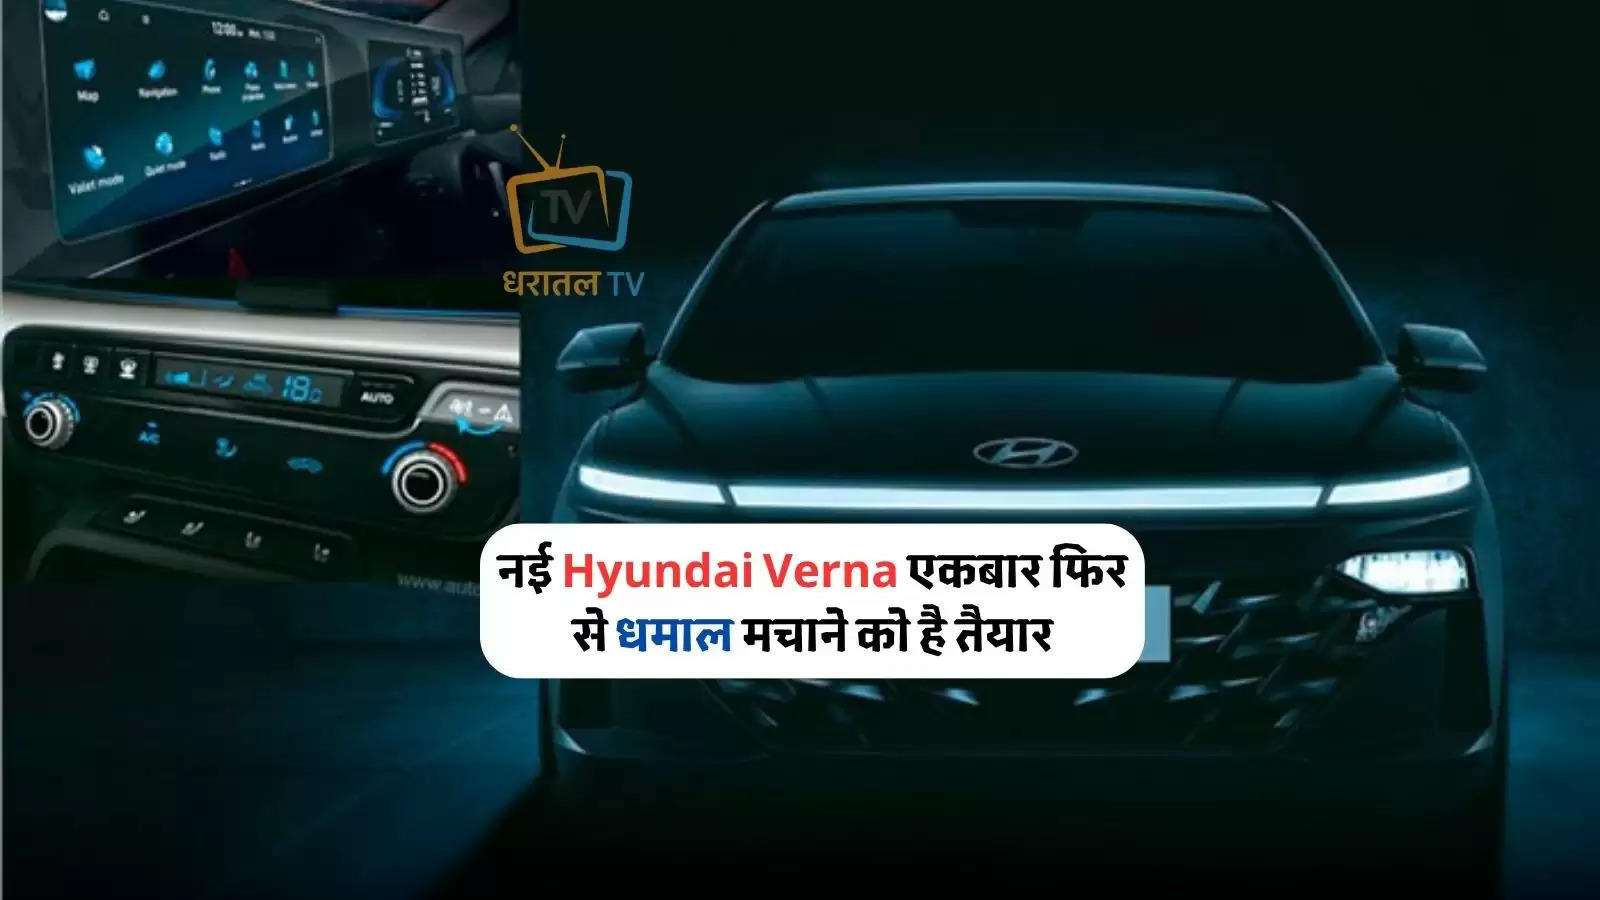 New Hyundai Verna is ready to rock once again